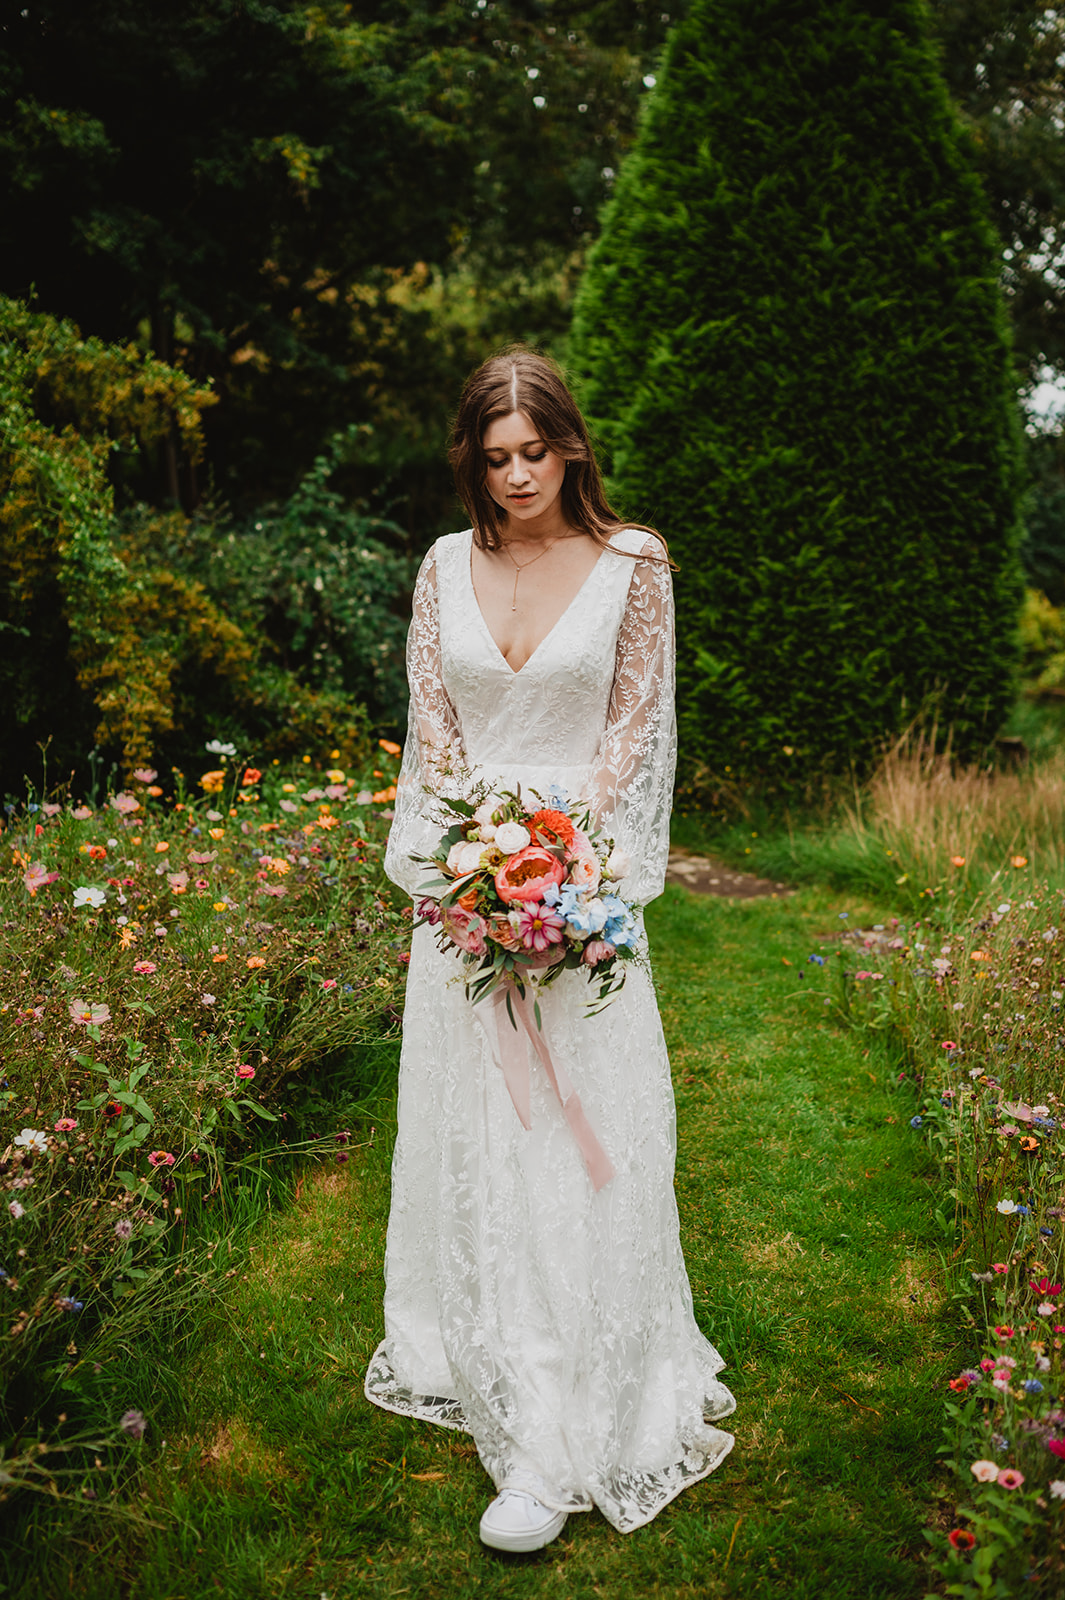 A bride poses with her flowers in the gardens at Redcoats Farmhouse